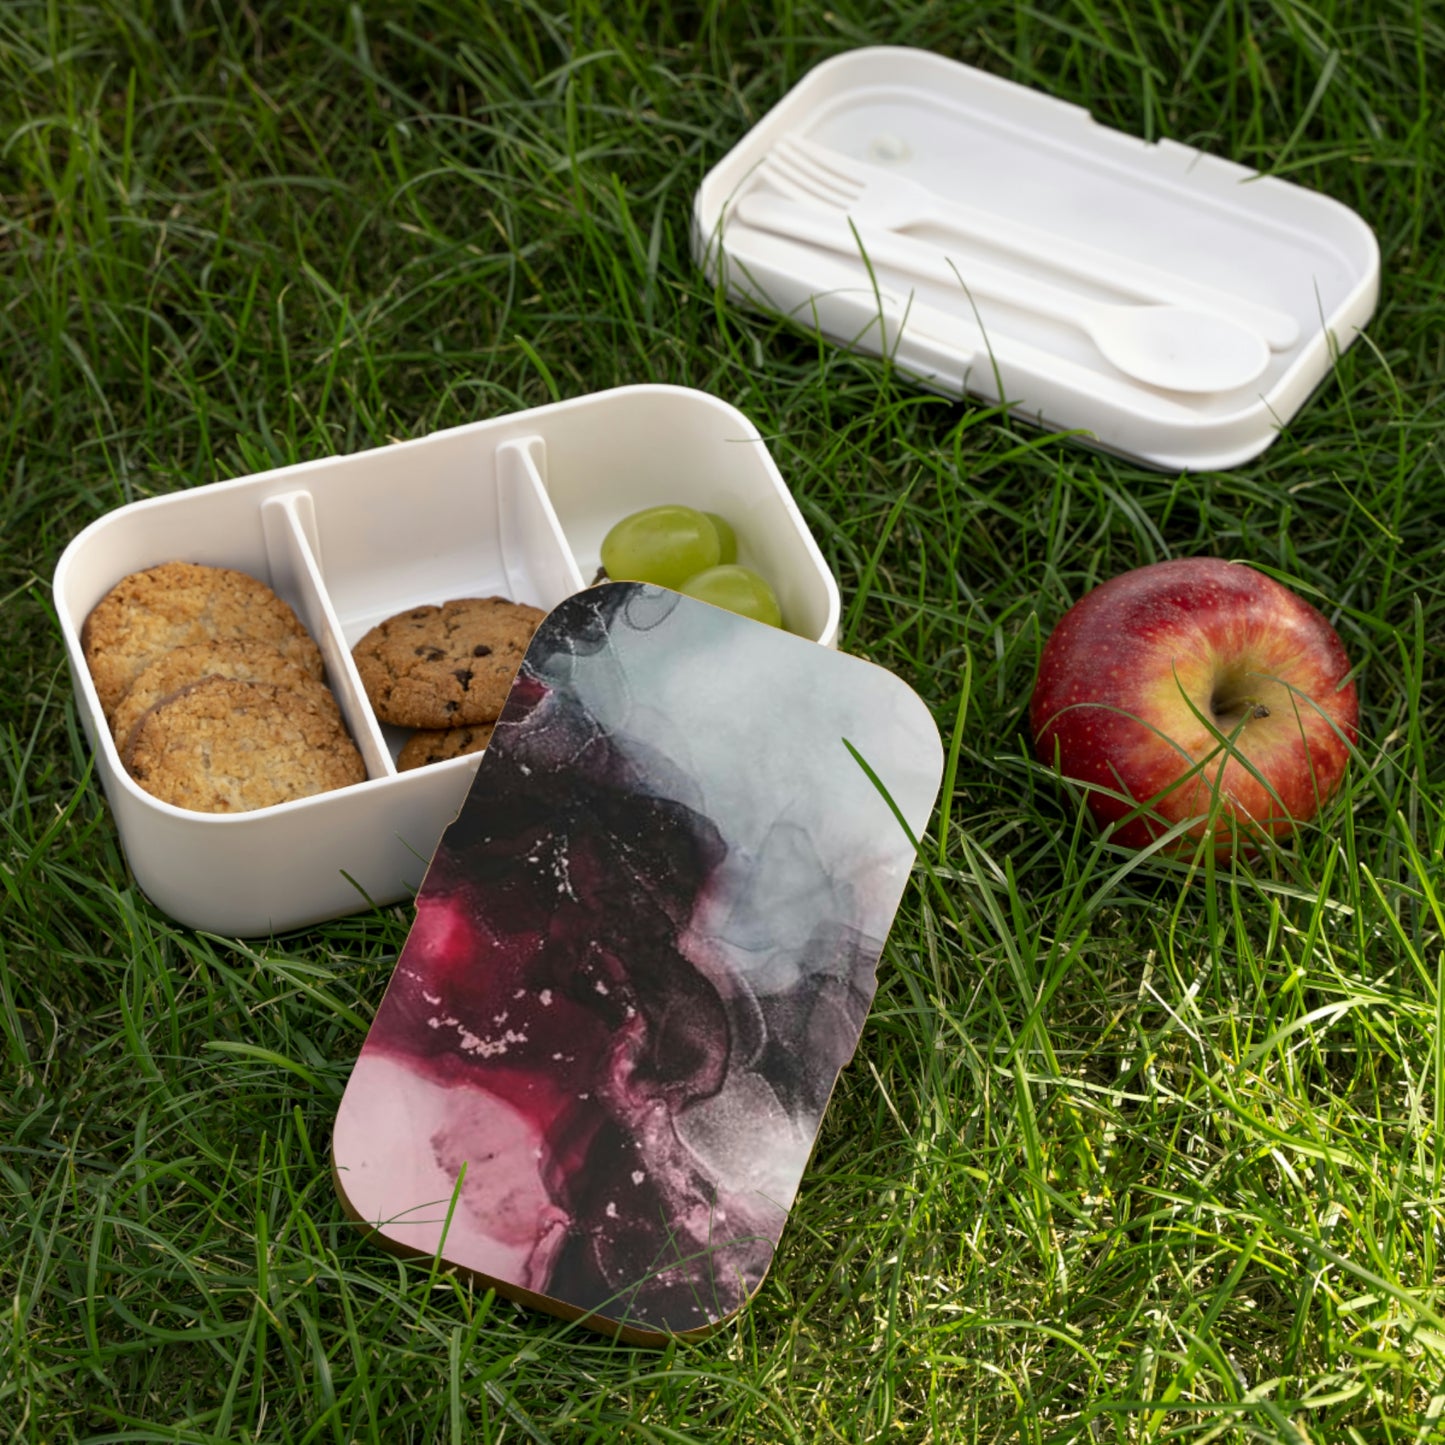 Plum Marbled Bento Lunch Box